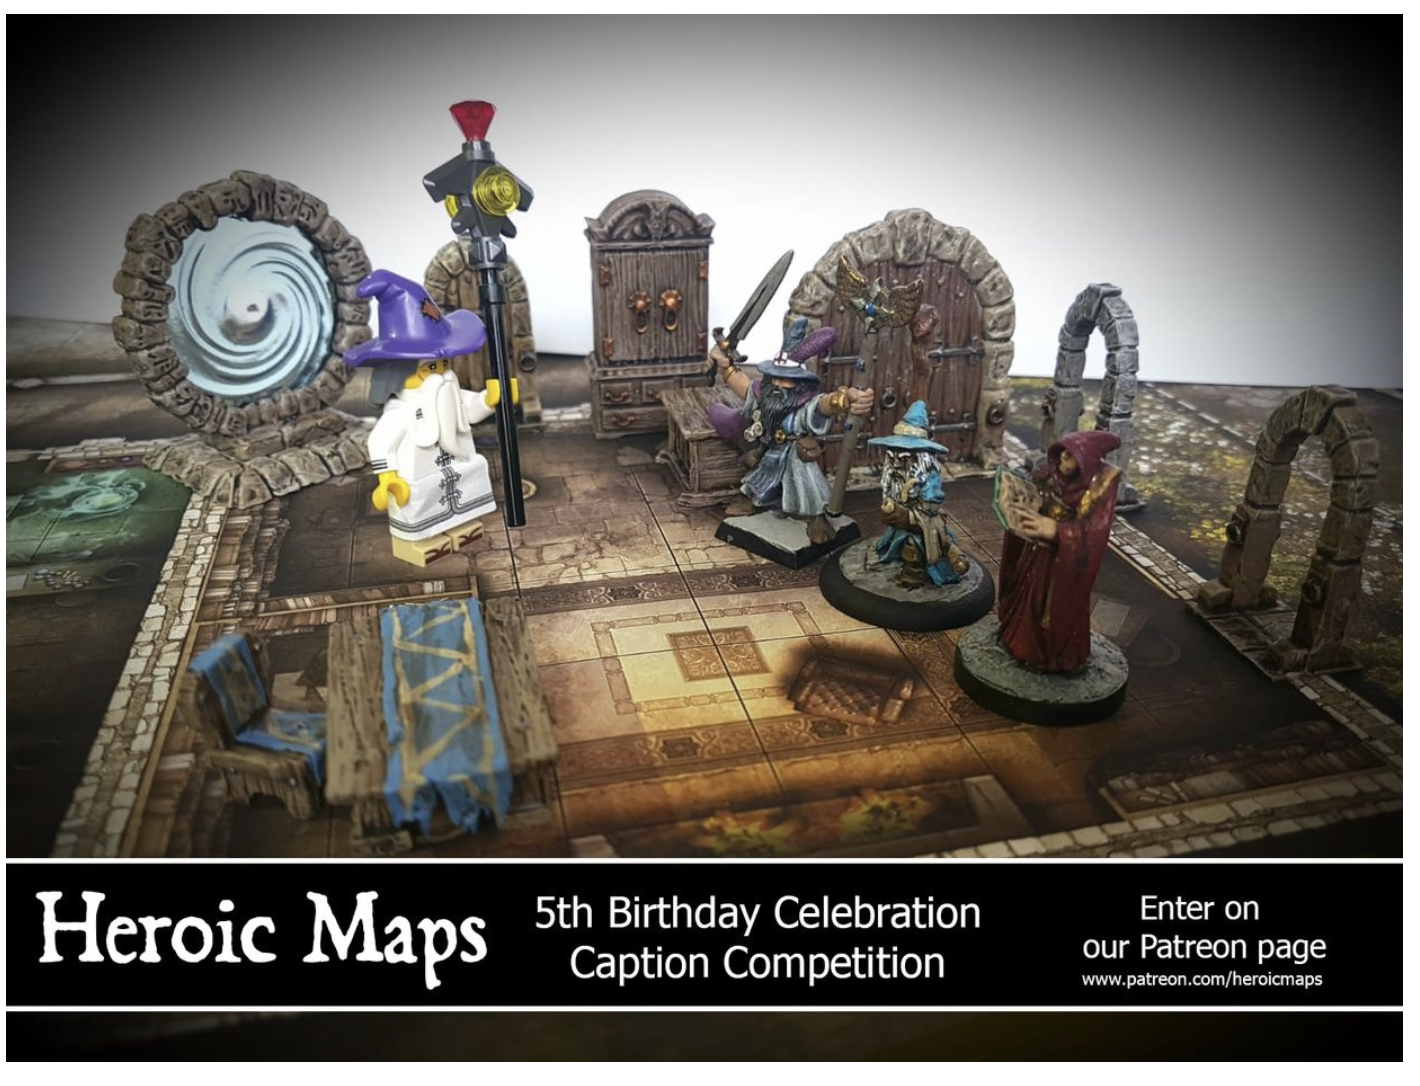 Heroic Maps Caption Competition Now Live!